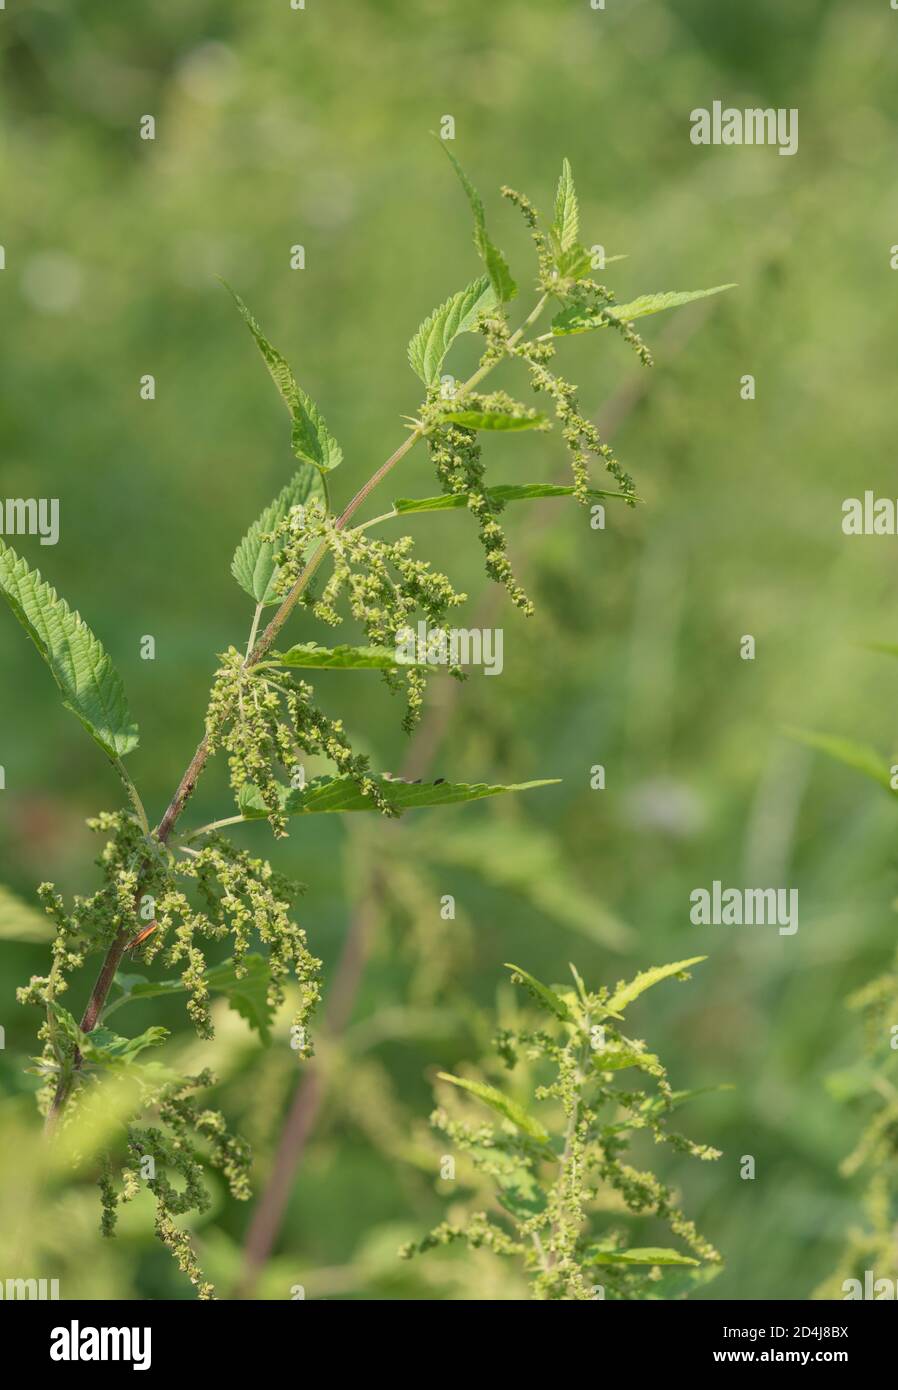 Blooming medicinal plant nettle dioecious in the natural environment on a summer green meadow Stock Photo